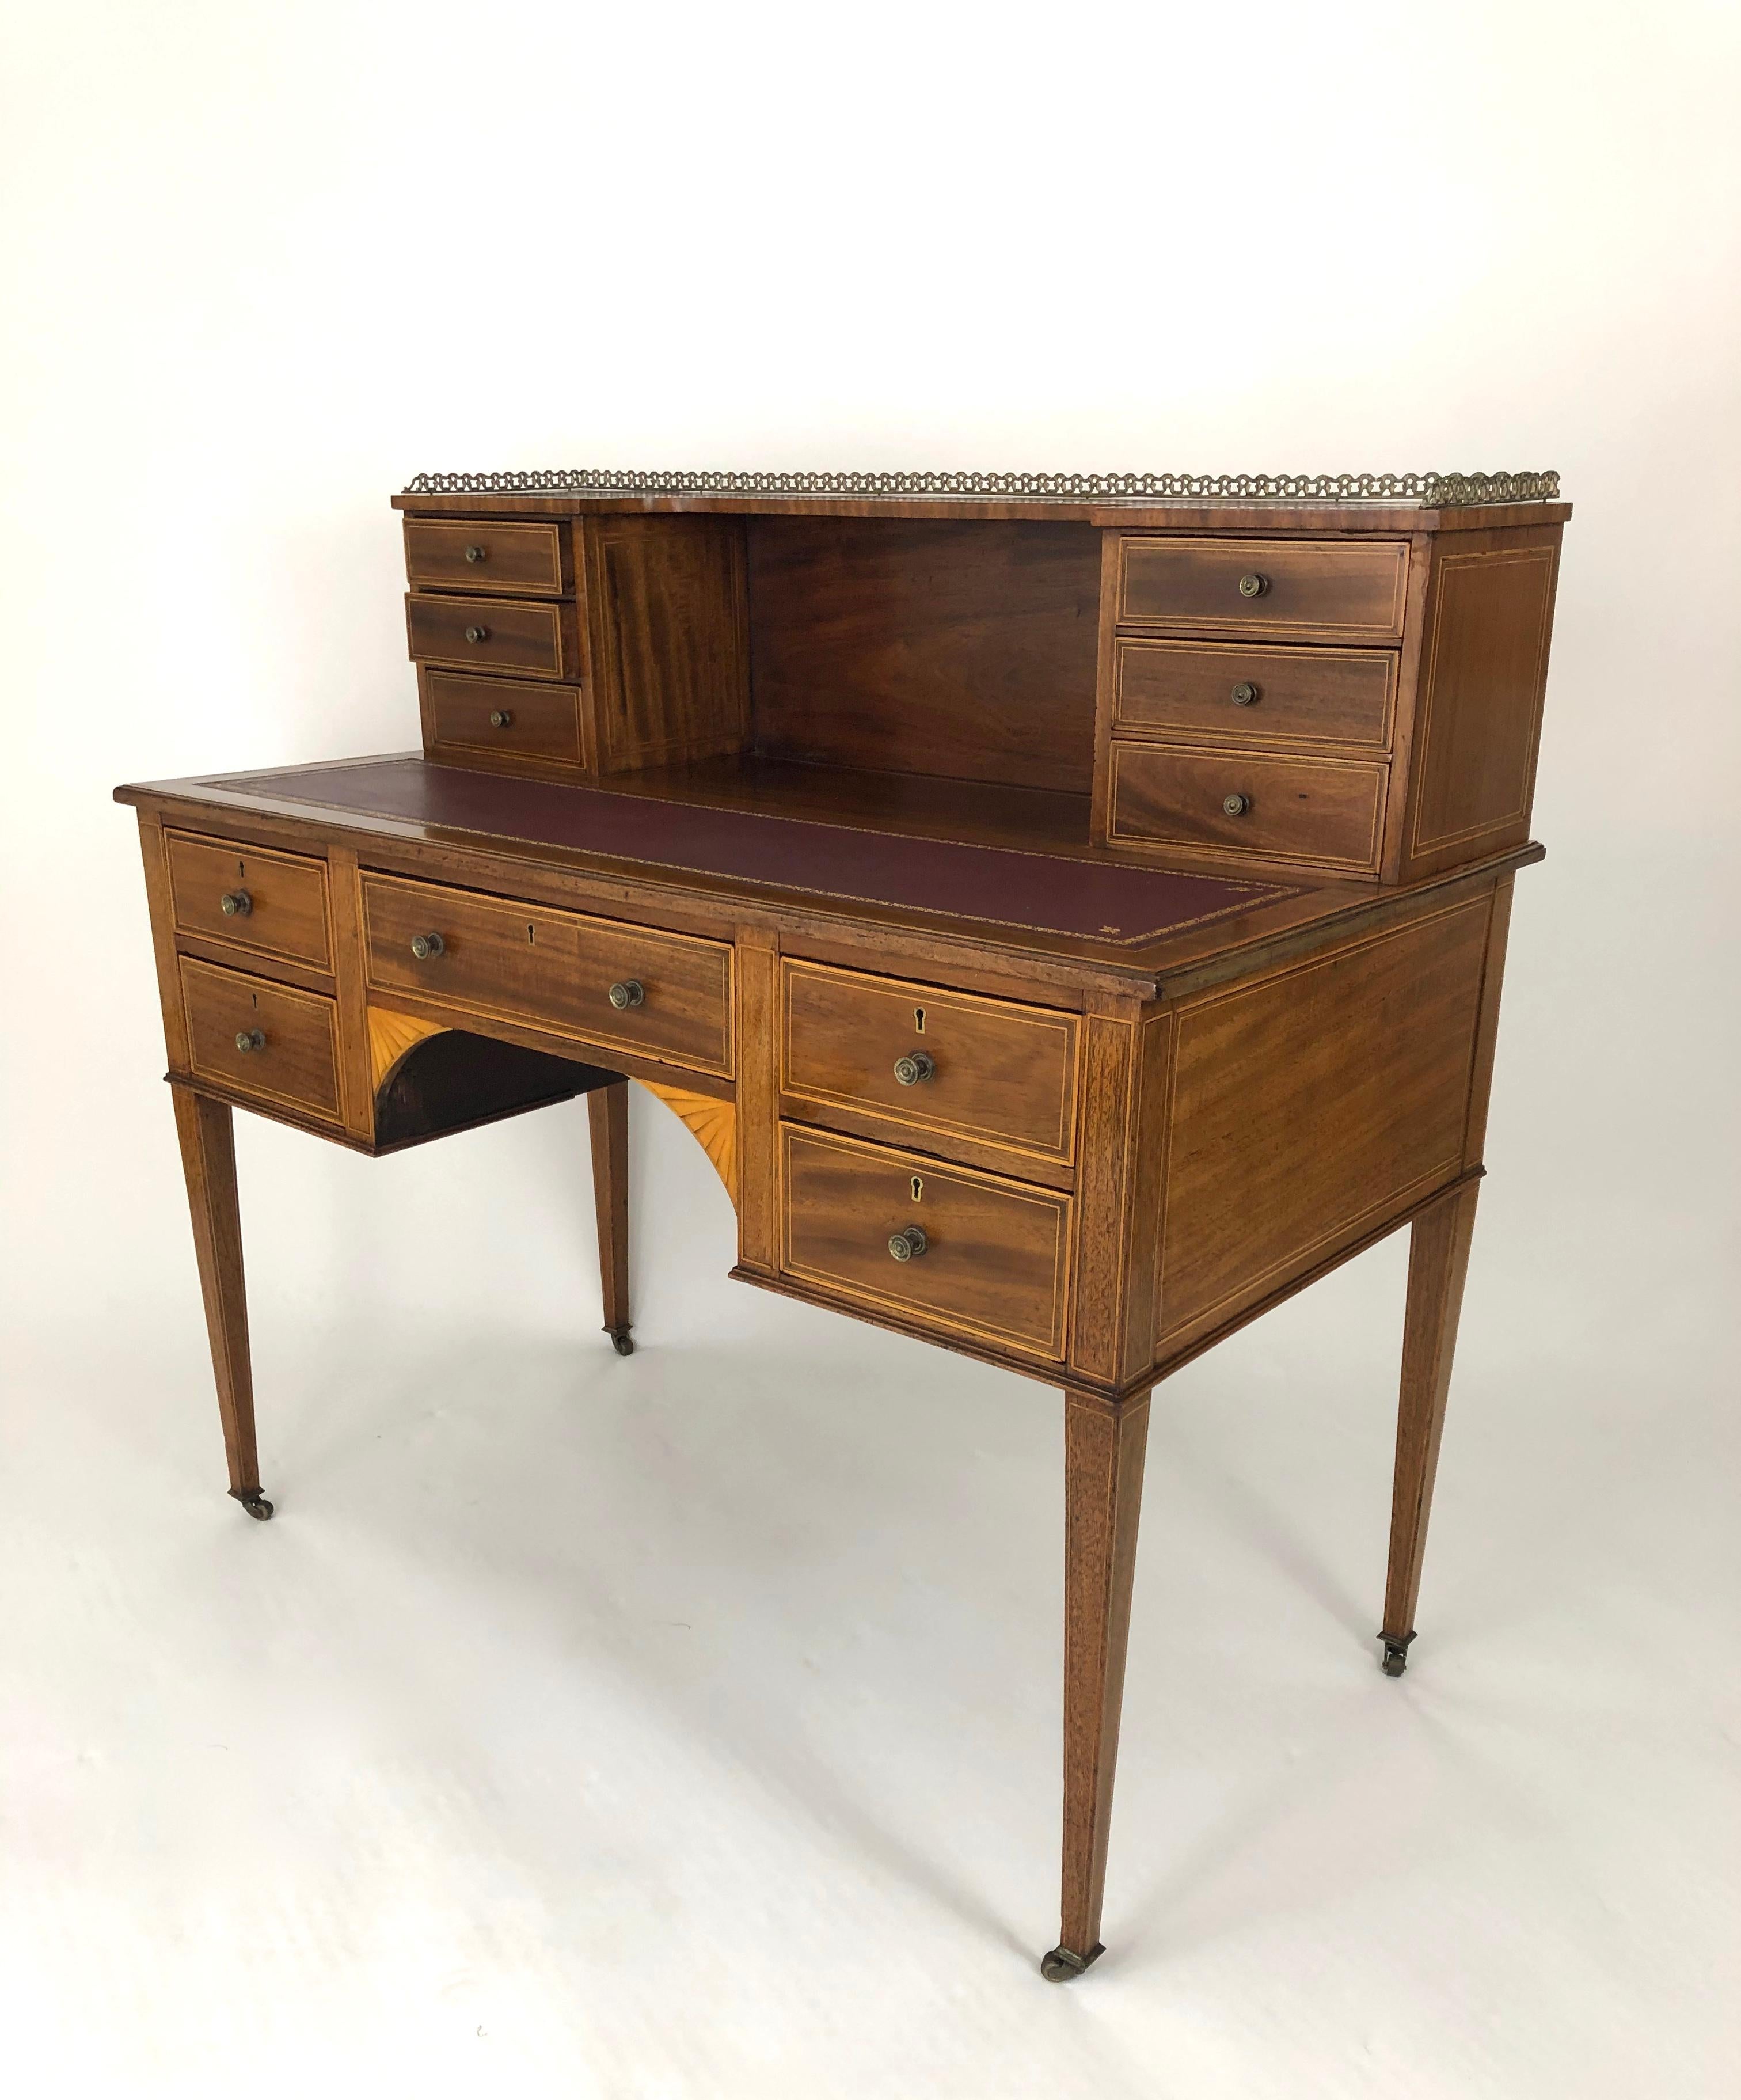 A fine quality and versatile George III inlaid mahogany writing desk, English, circa 1800, the super structure with brass gallery supported by two banks with three drawers each over a beautiful gold stamped burgundy leather writing surface below